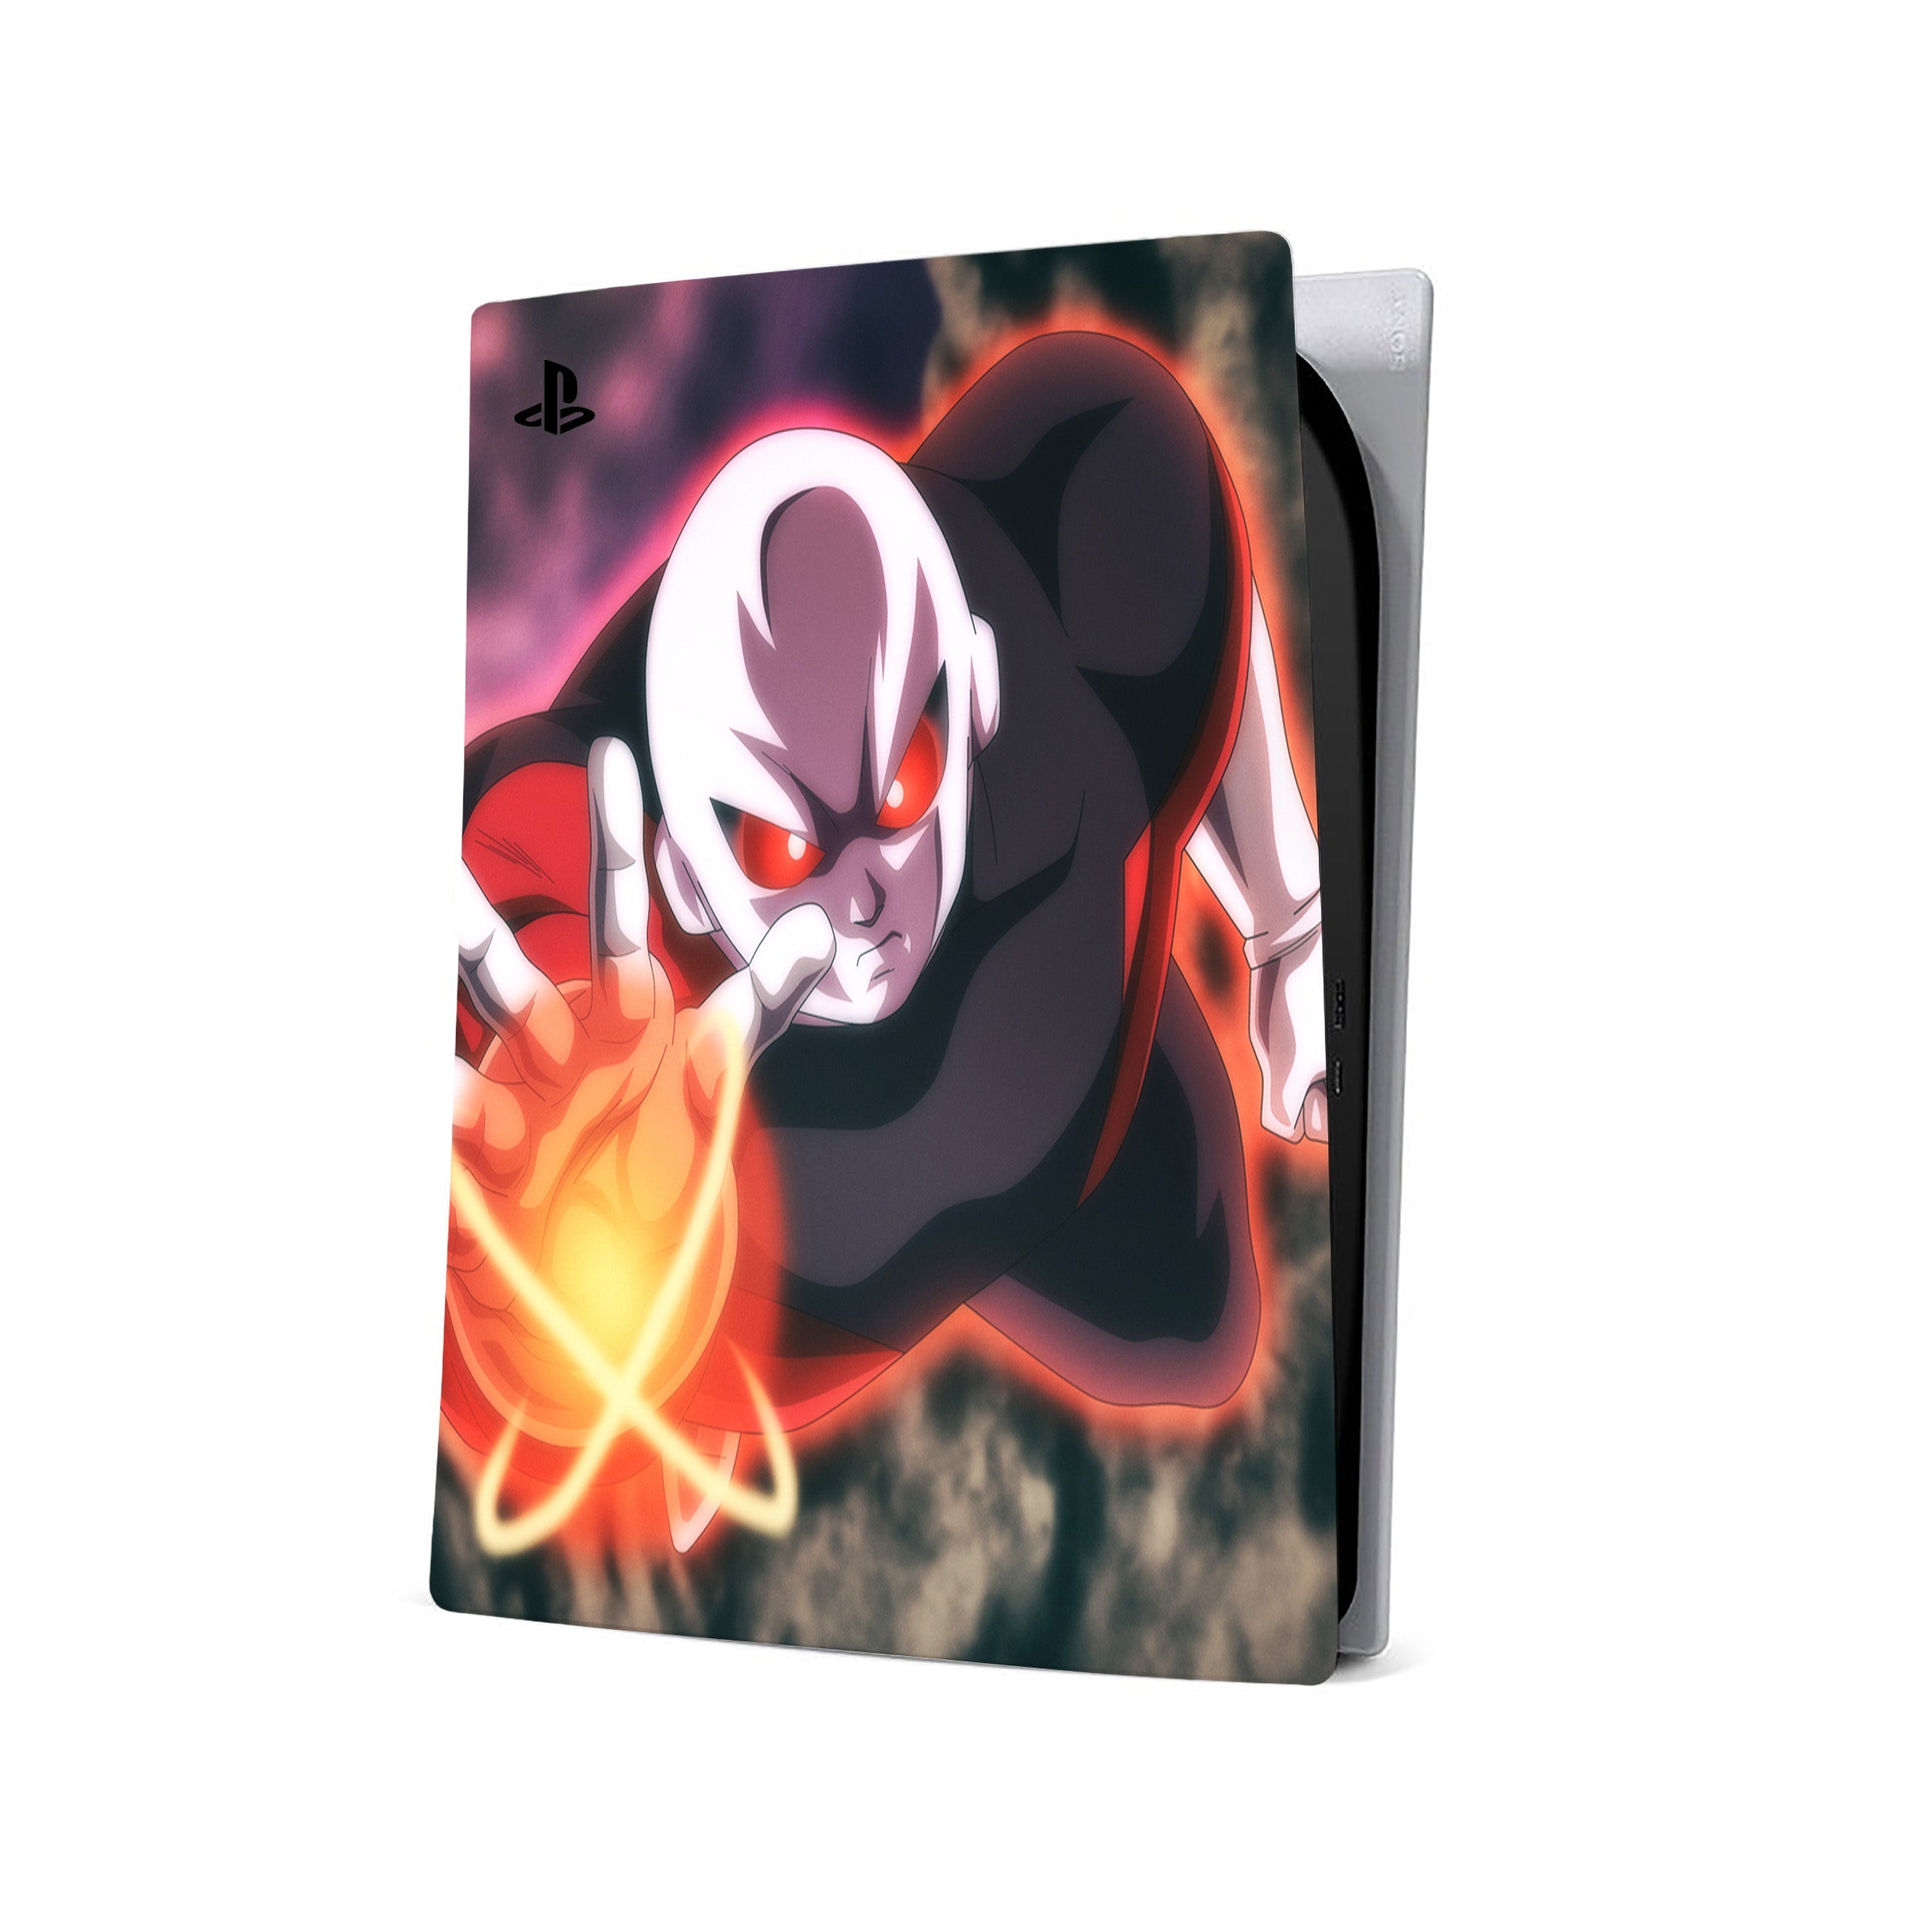 A video game skin featuring a Dragon Ball Super Jiren design for the PS5.